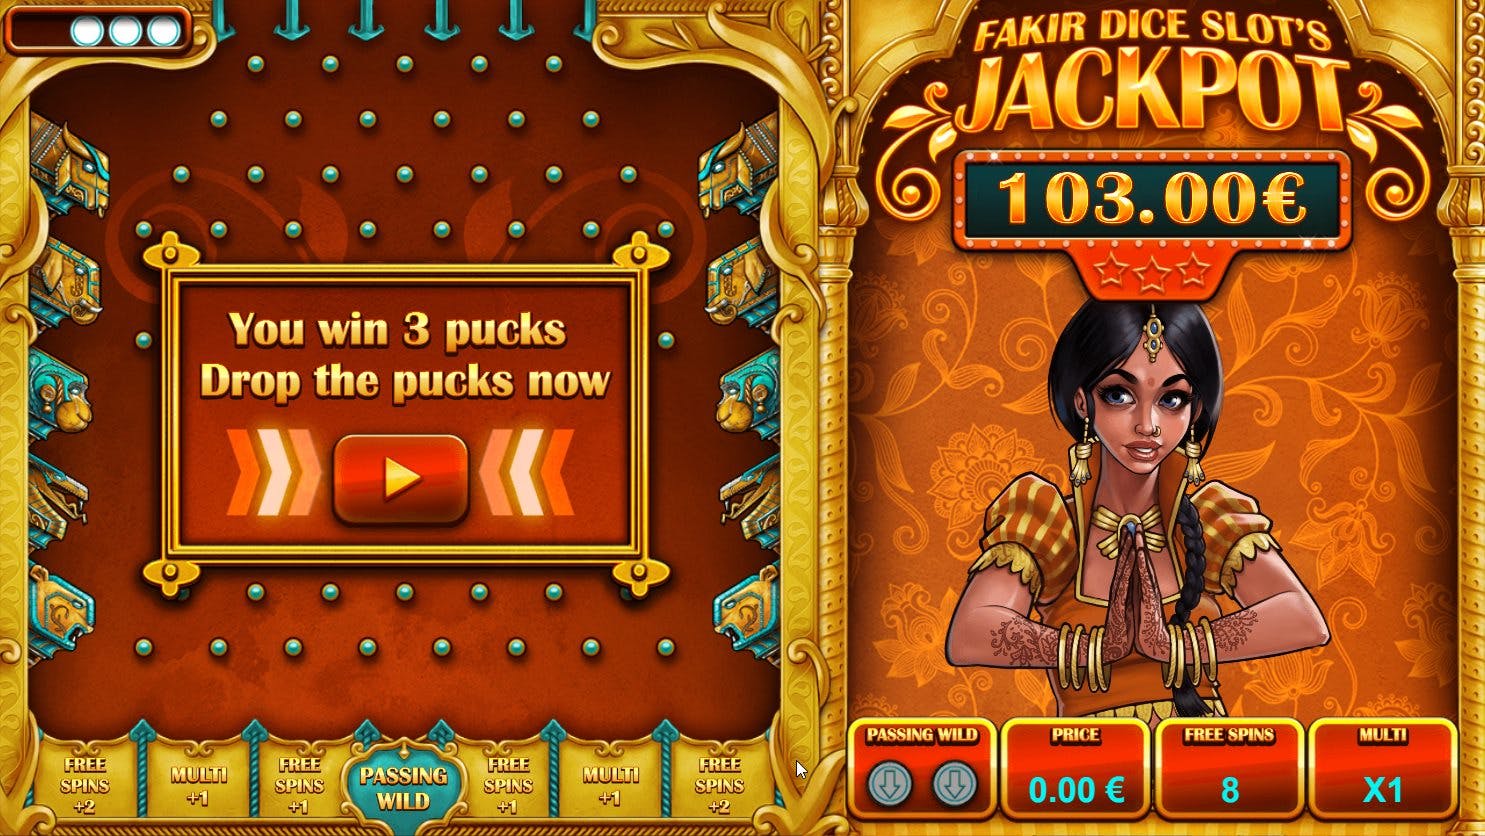 Fakir Dice Slot game on LuckyGames Casino